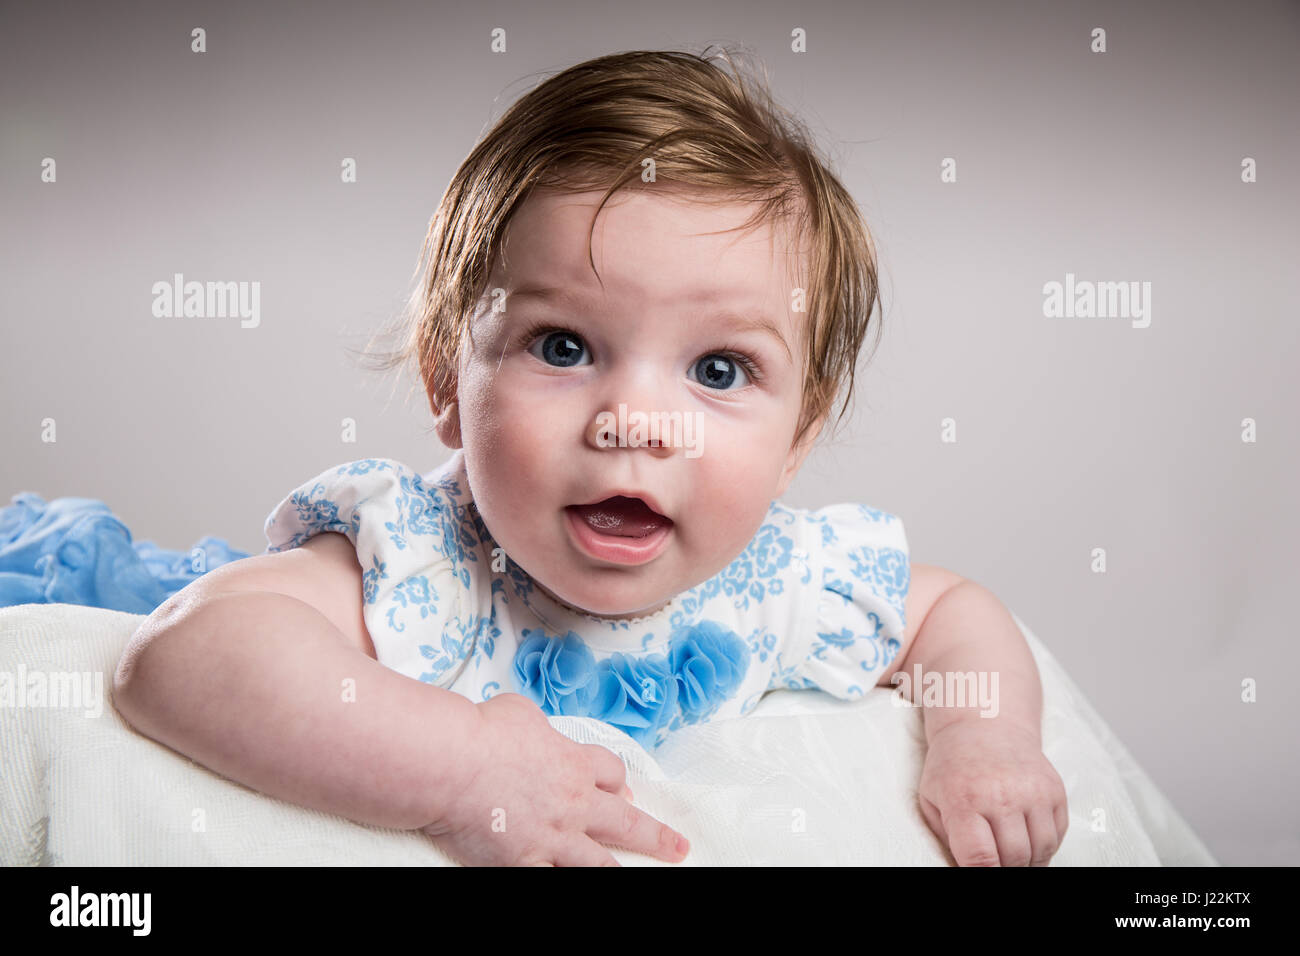 Portrait of a happy four month old baby girl Stock Photo